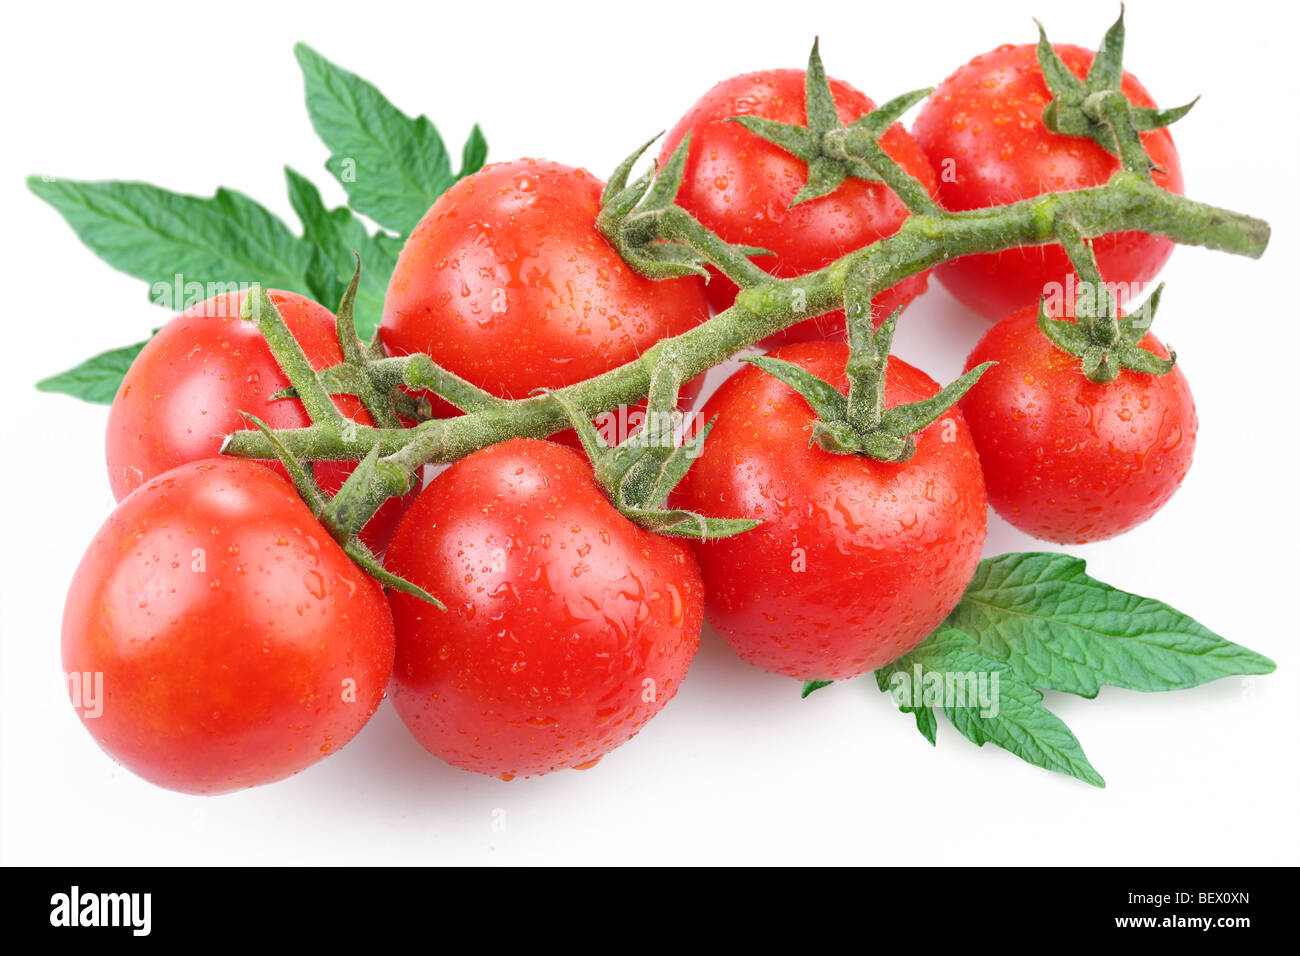 Tomatoes, object on a white background Stock Photo